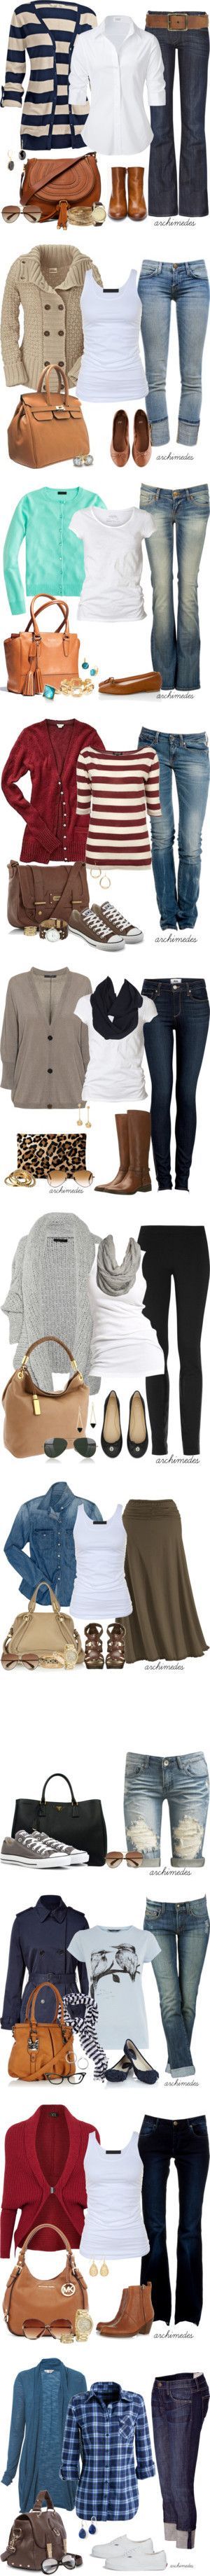 everyday outfits for fall